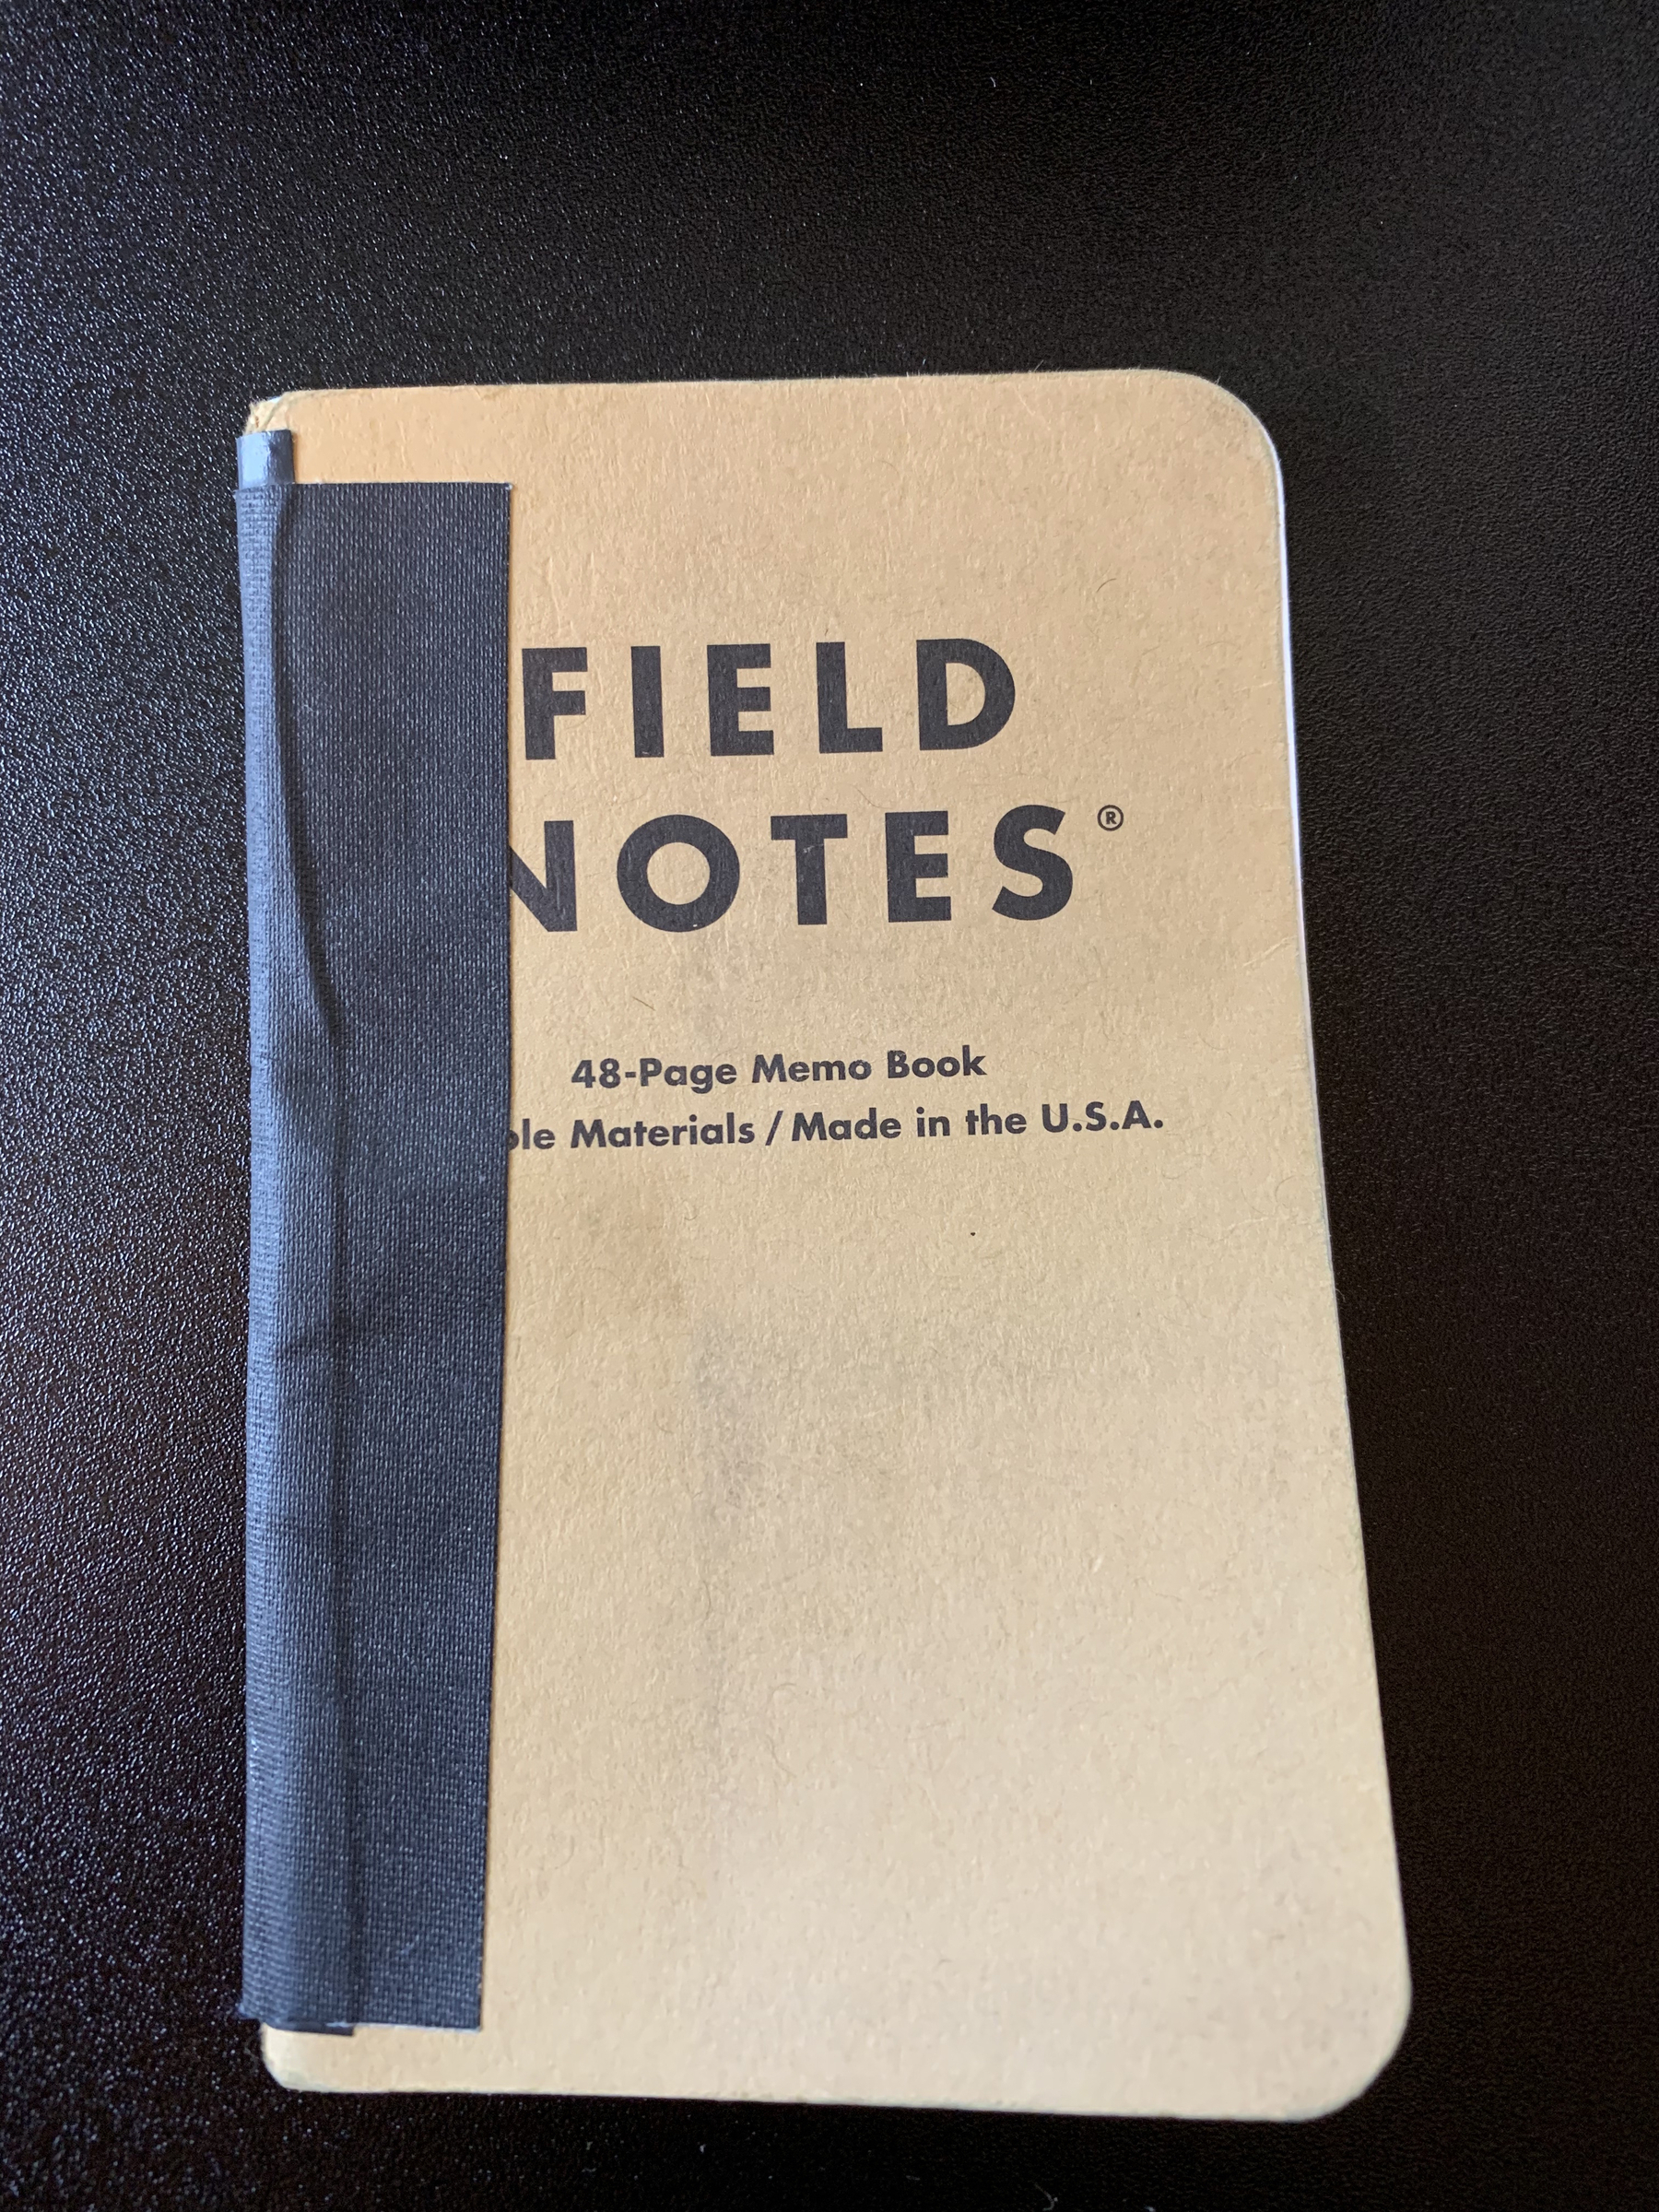 Field Notes Held together by Electrical Tape